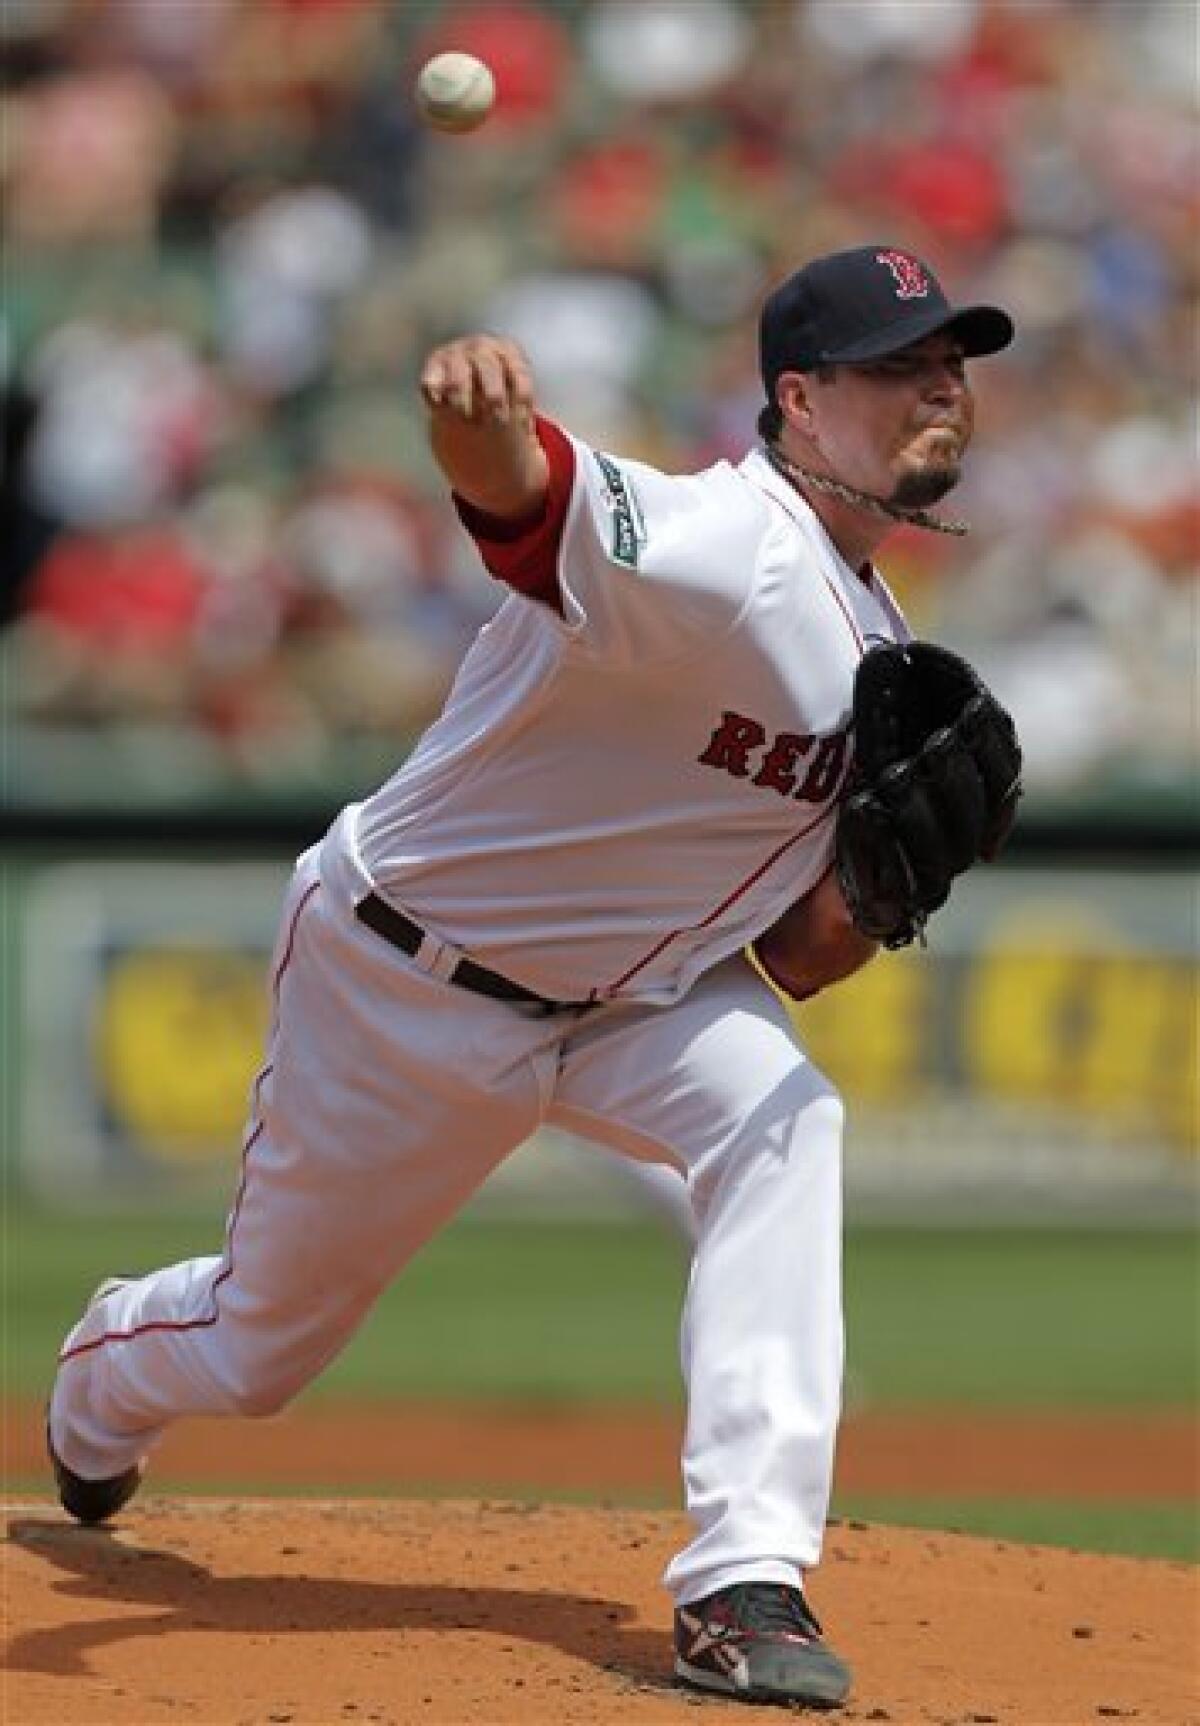 Josh Beckett strong again for Red Sox - The Boston Globe